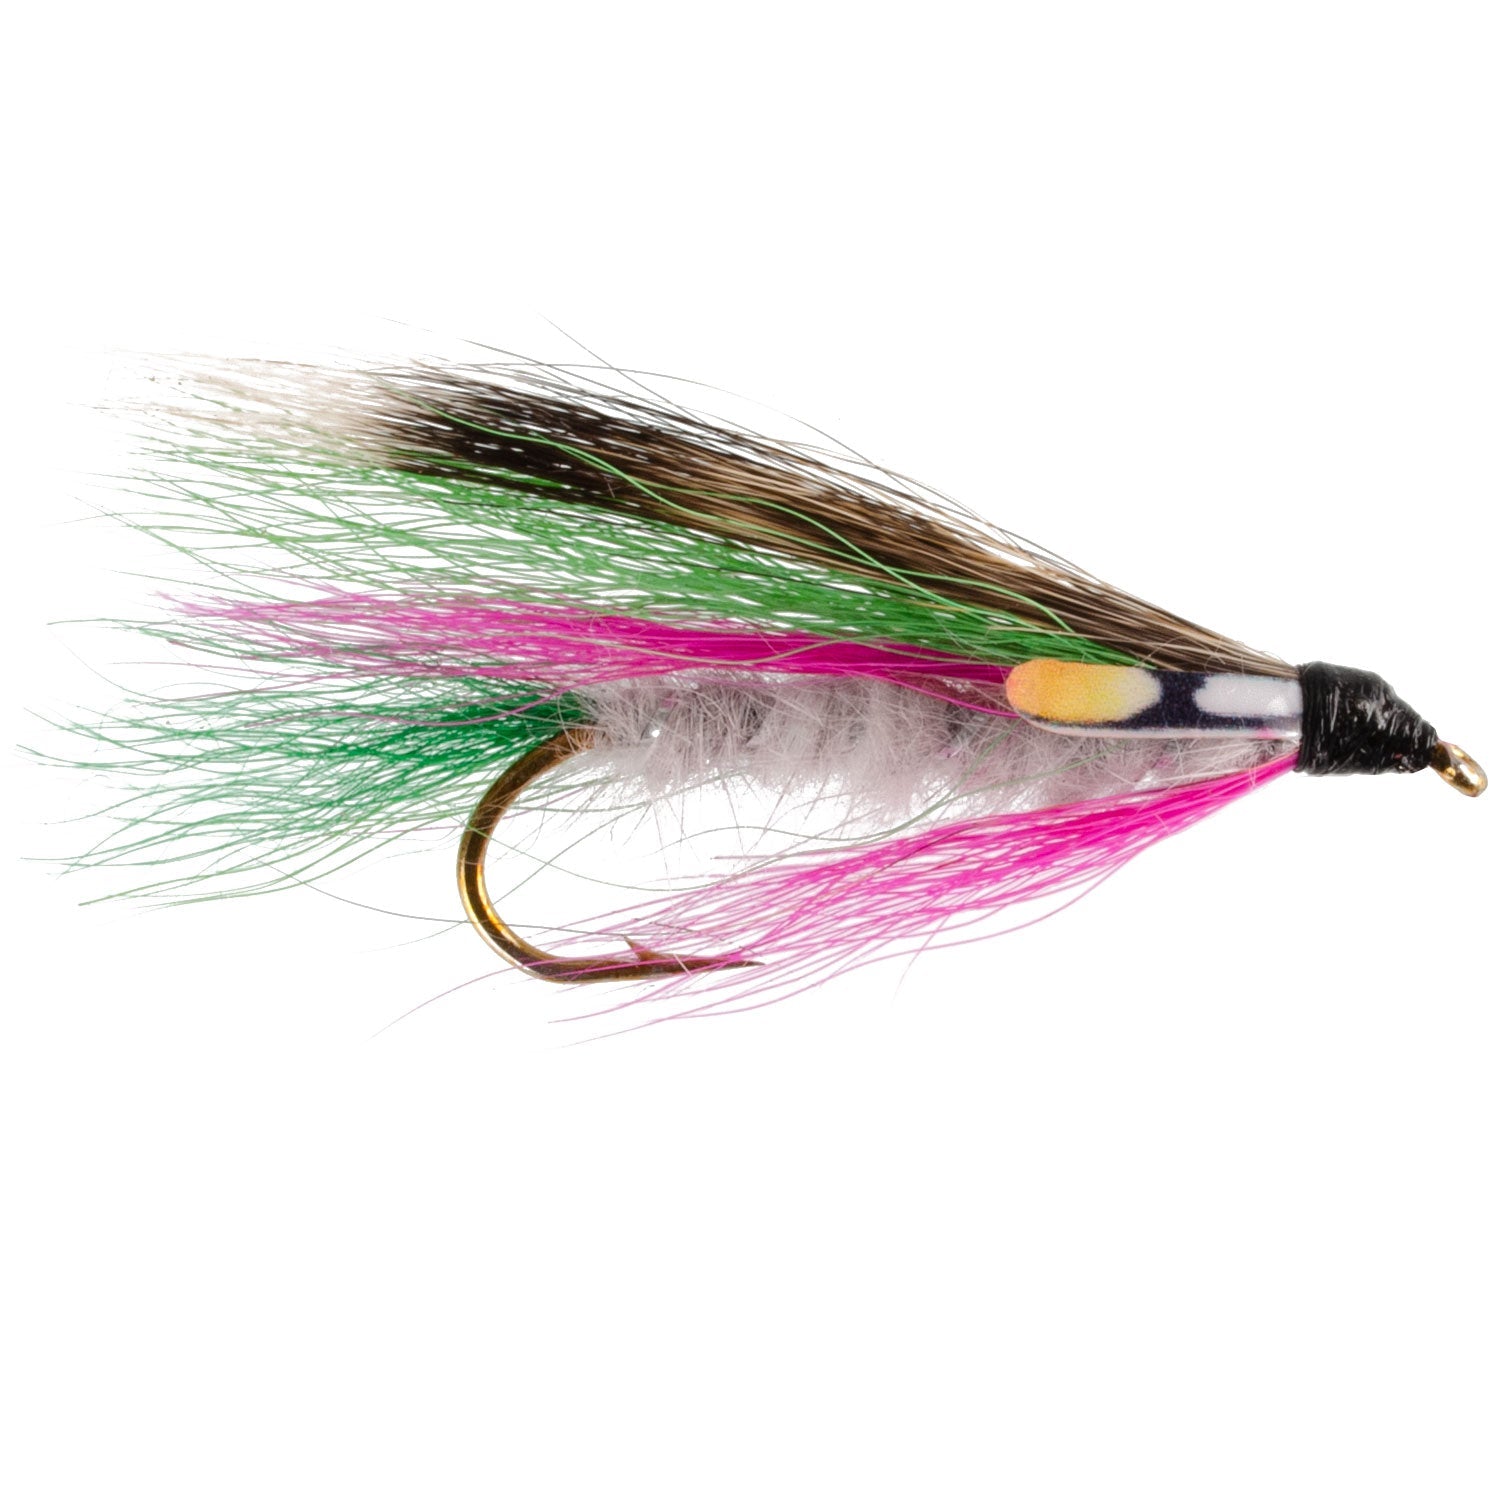 Classic Streamers Fly Fishing Flies Collection - Assortment of 12 Trout Wet Fly Streamer Flies - Hook Size 4